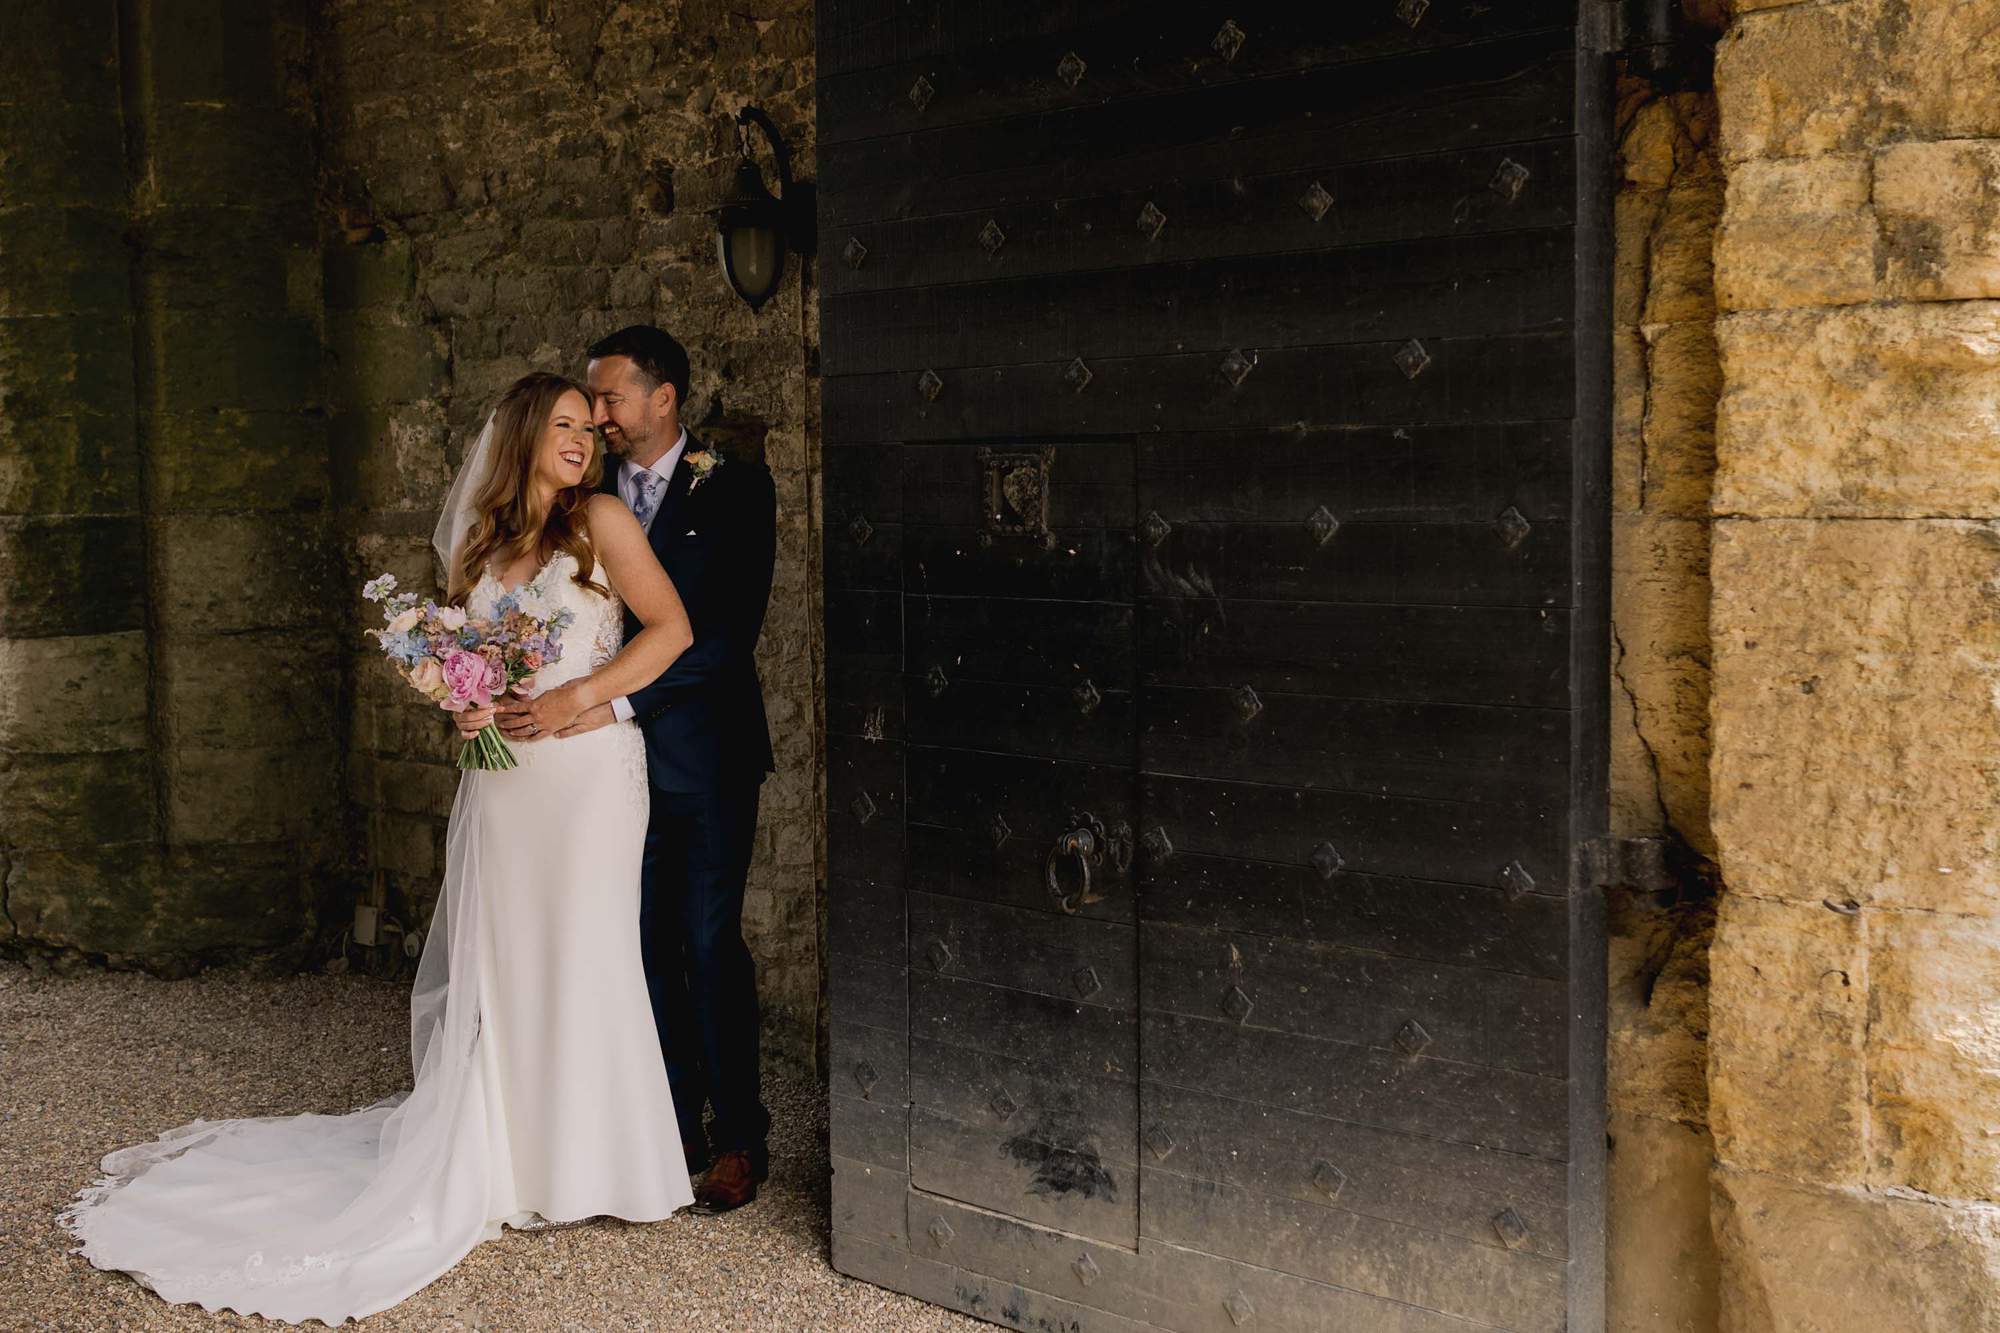 Bride and groom hug closely on their wedding day at Amberley Castle in West Sussex.